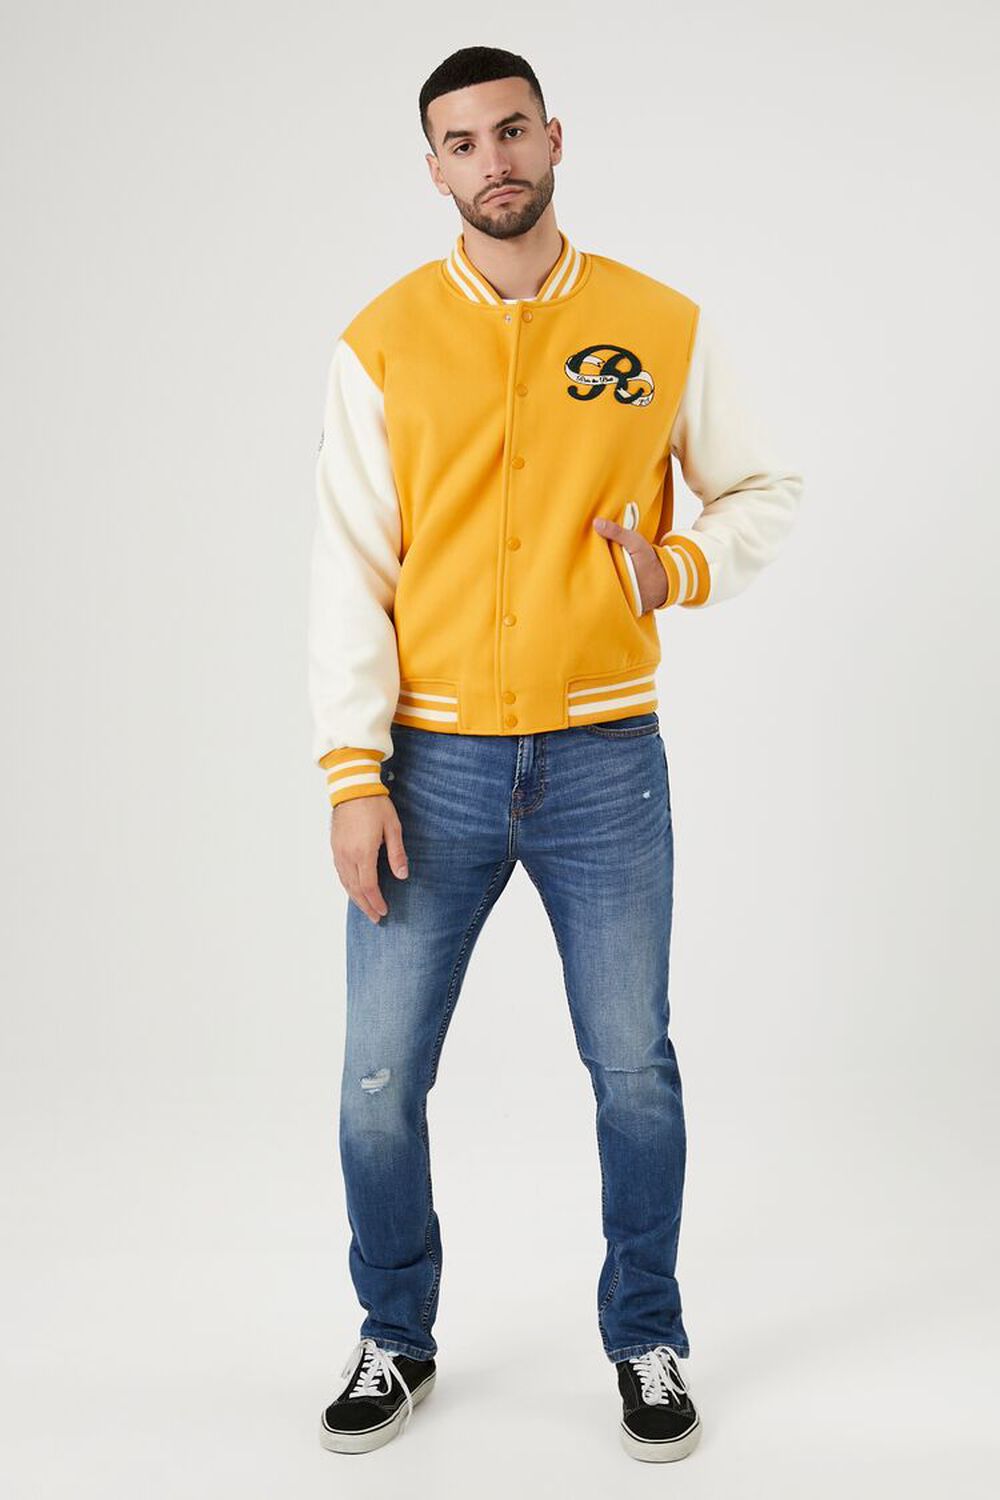 Mens Yellow and Black Varsity Letterman Jacket with Hood